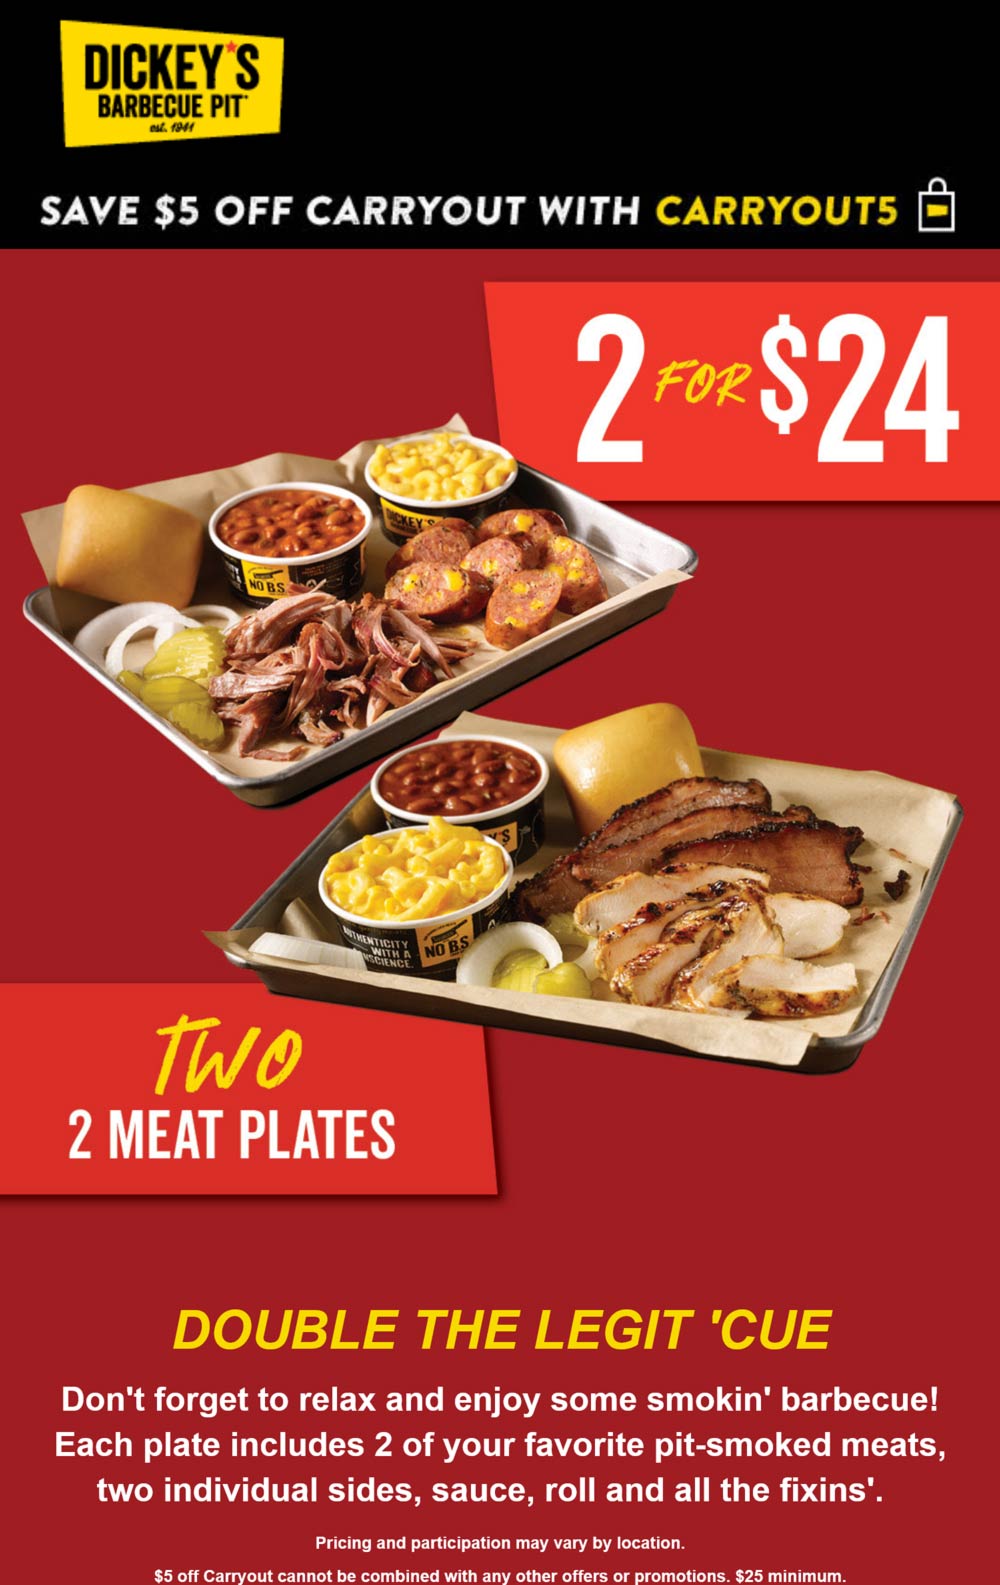 Dickeys Barbecue Pit restaurants Coupon  $5 off carryout at Dickeys Barbecue Pit restaurants via promo code CARRYOUT5 #dickeysbarbecuepit 